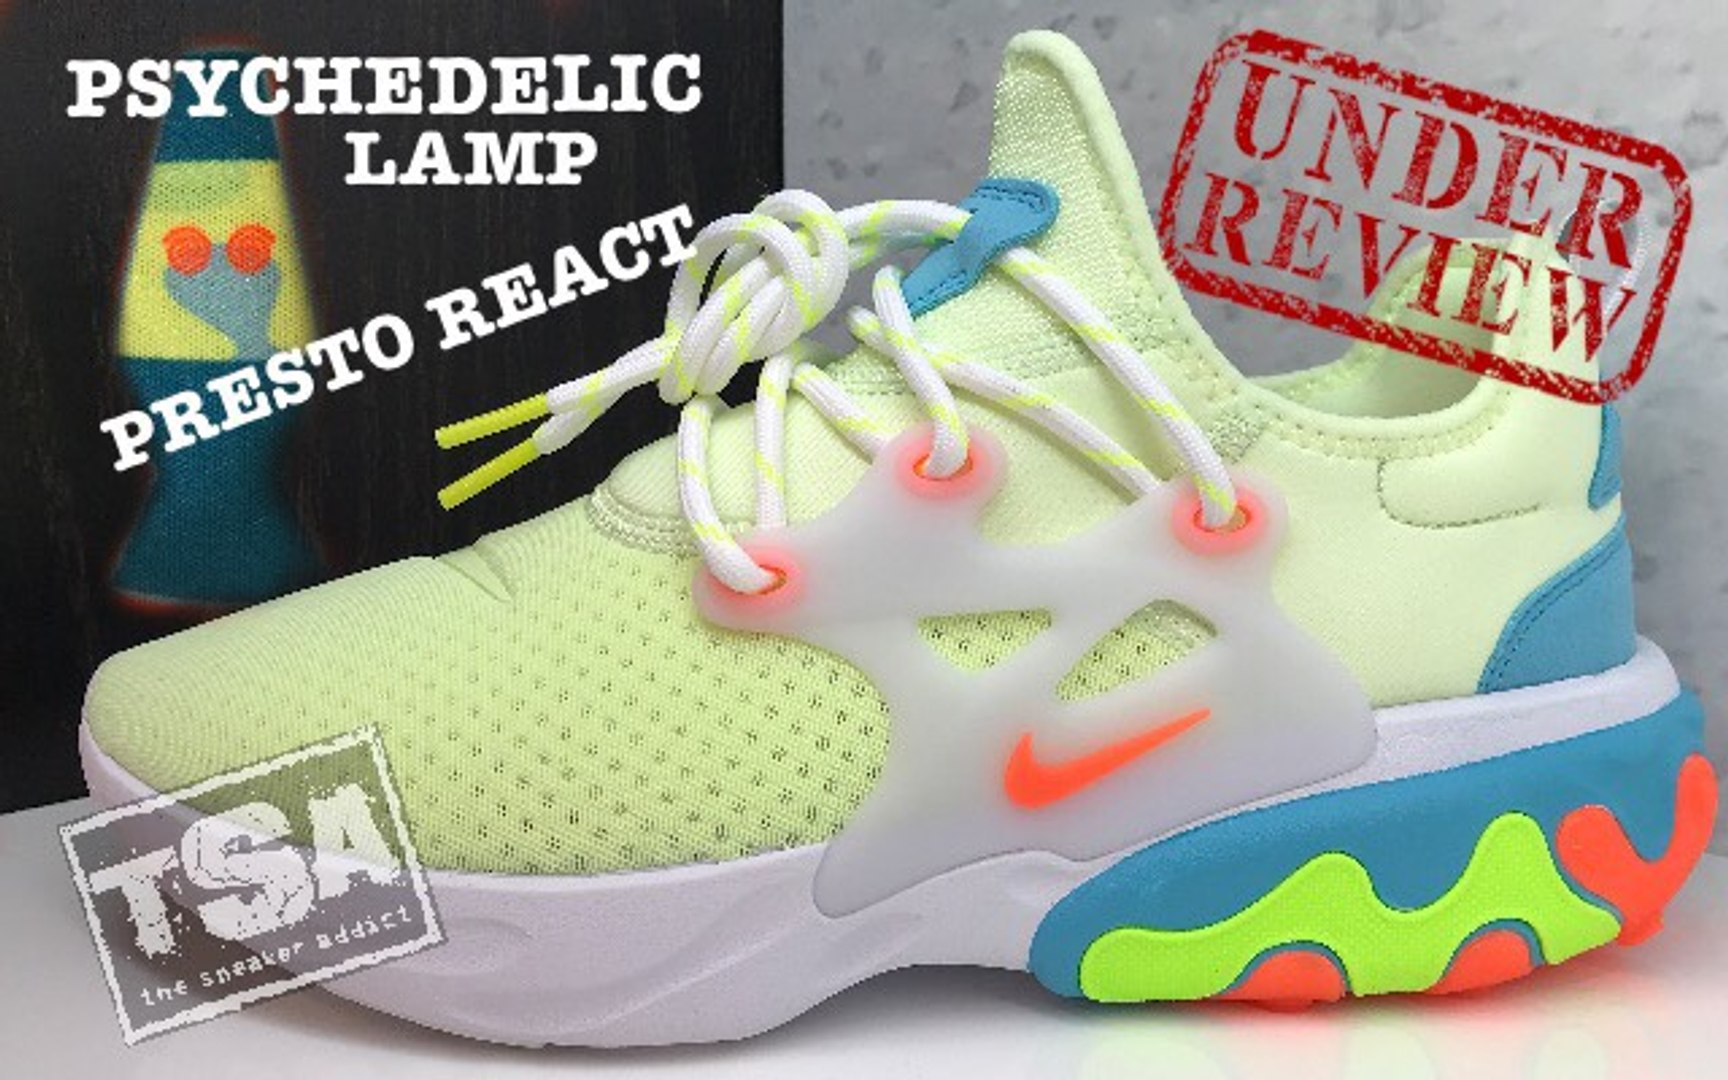 Nike Presto React Psychedelic Lava Lamp Sneaker Review - video Dailymotion